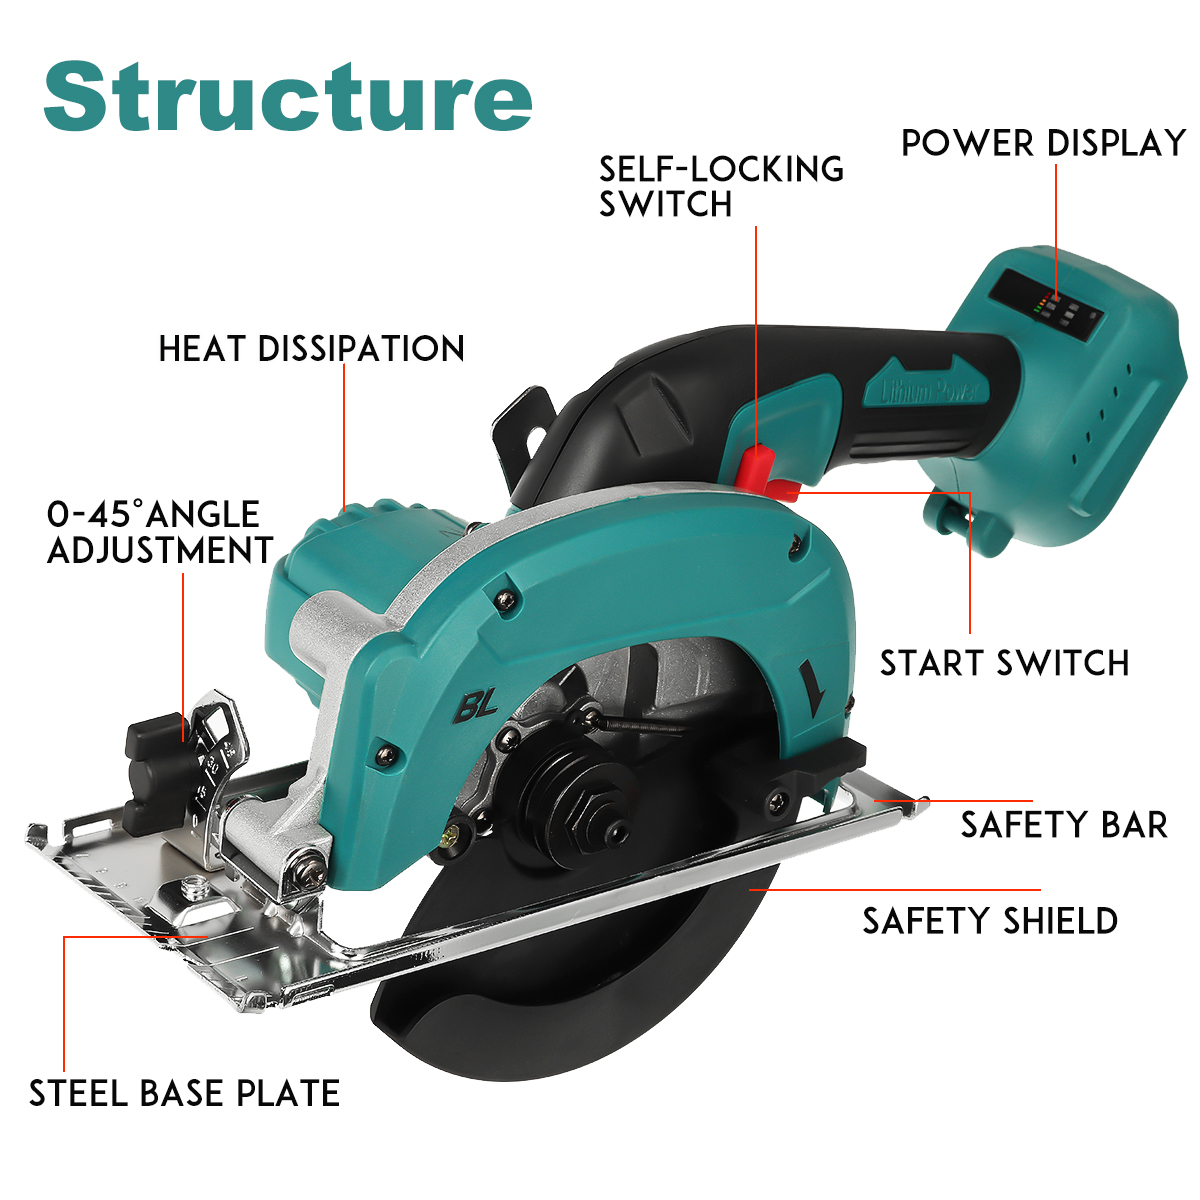 132150mm-Cordless-Electric-Circular-Saw-Curved-Cutting-Adjustable-Cut-Off-Saw-For-Woodworking-Fit-Ma-1924966-8